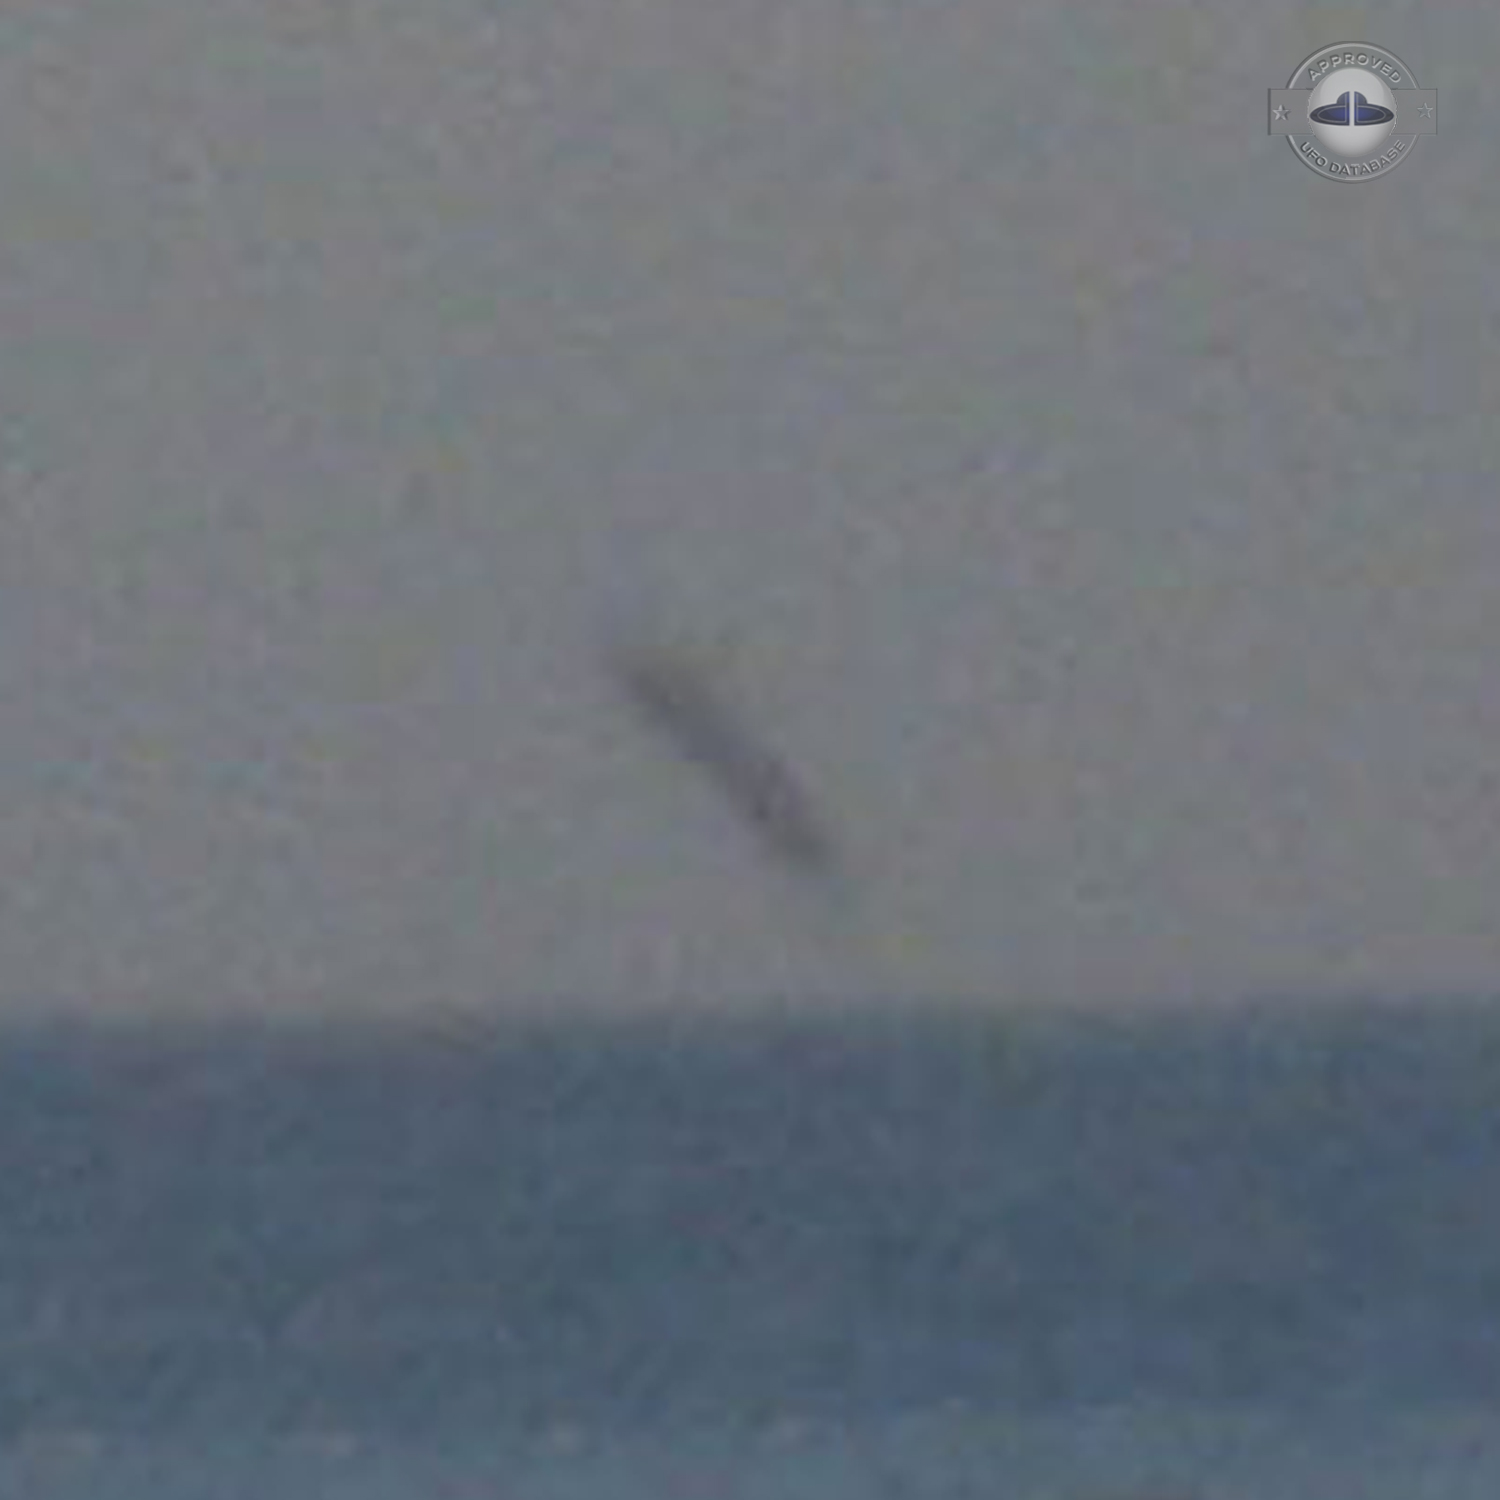 Proof of UFO diving under the Sea Canary island Fuerteventura | 2011 UFO Picture #235-4